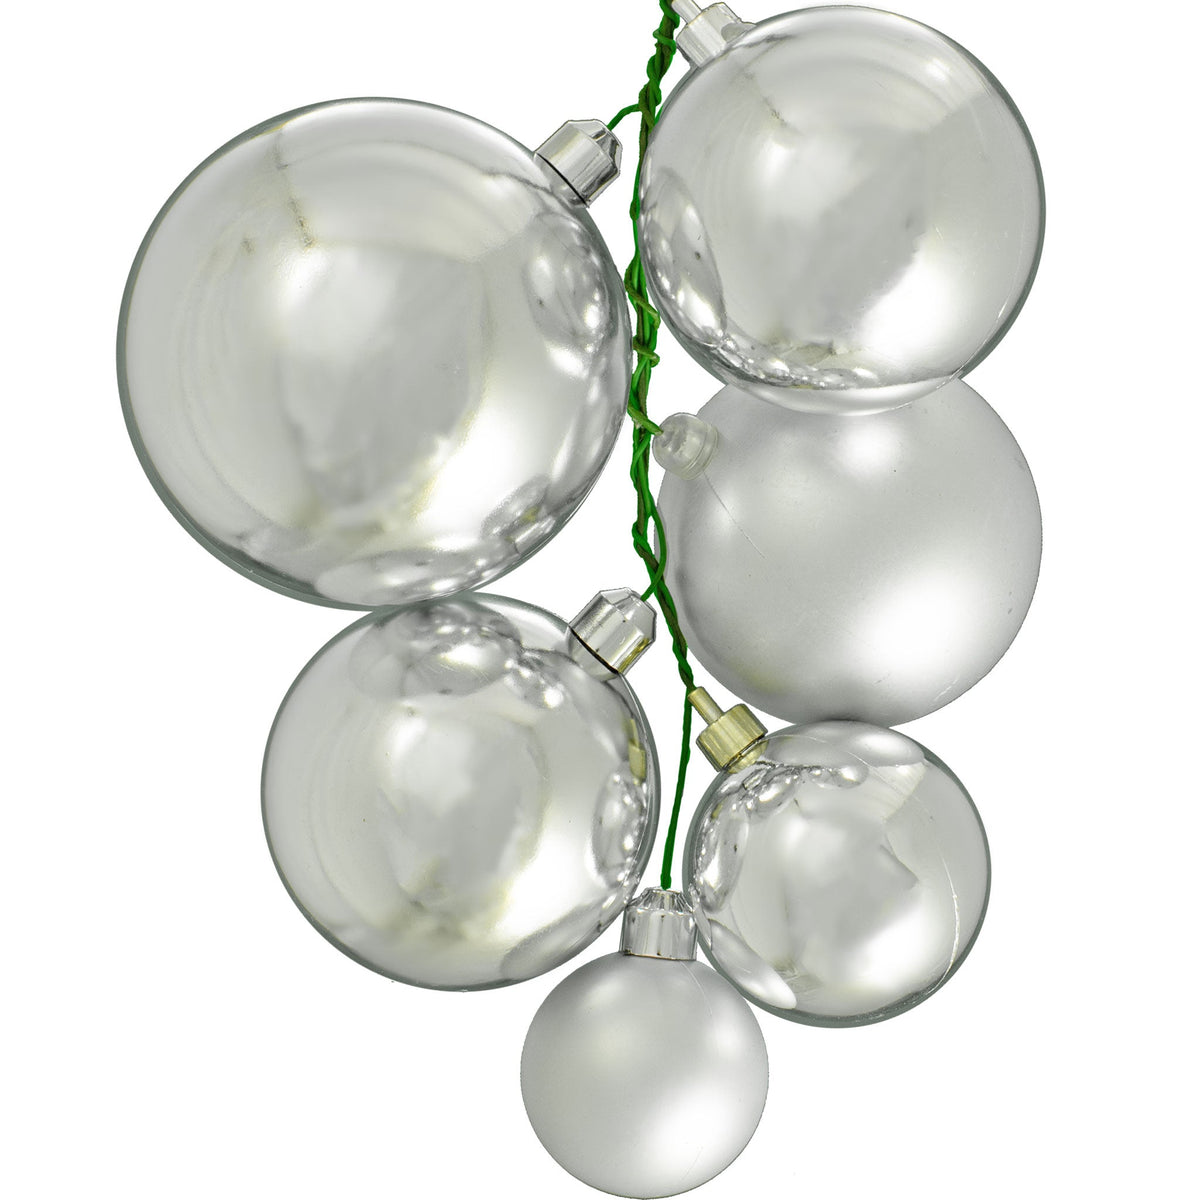 Colors include:  4 - Shiny Silver Ball Ornaments (100MM, 70MM, & 60MM) 2 - Matte Silver Ball Ornaments (70MM & 50MM)